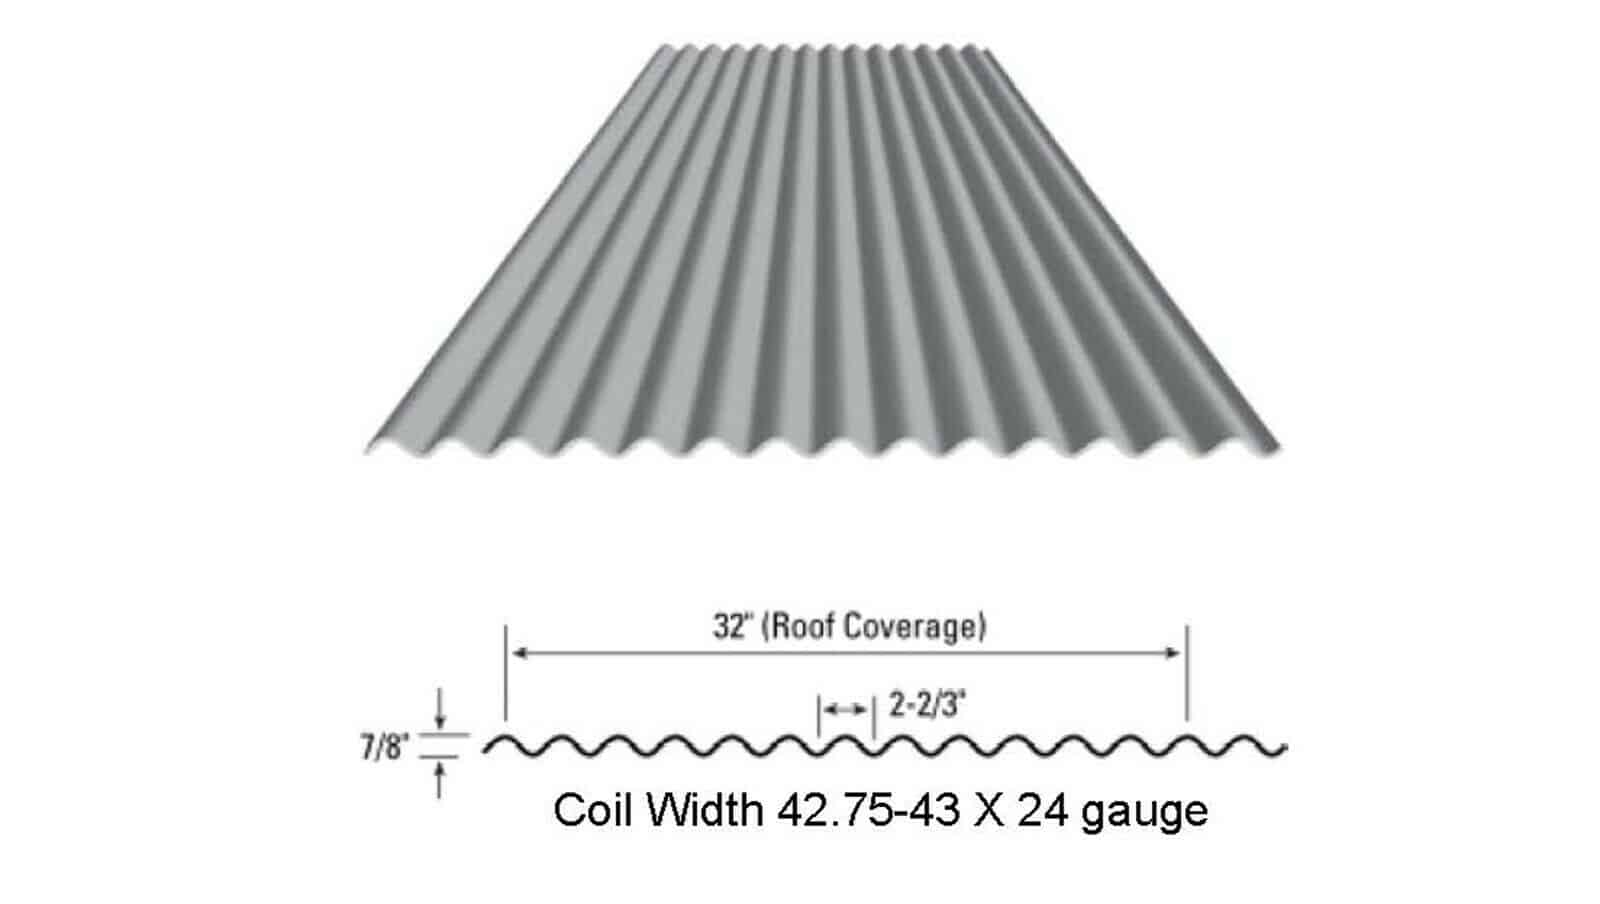 corrugated metal roofing dimensions